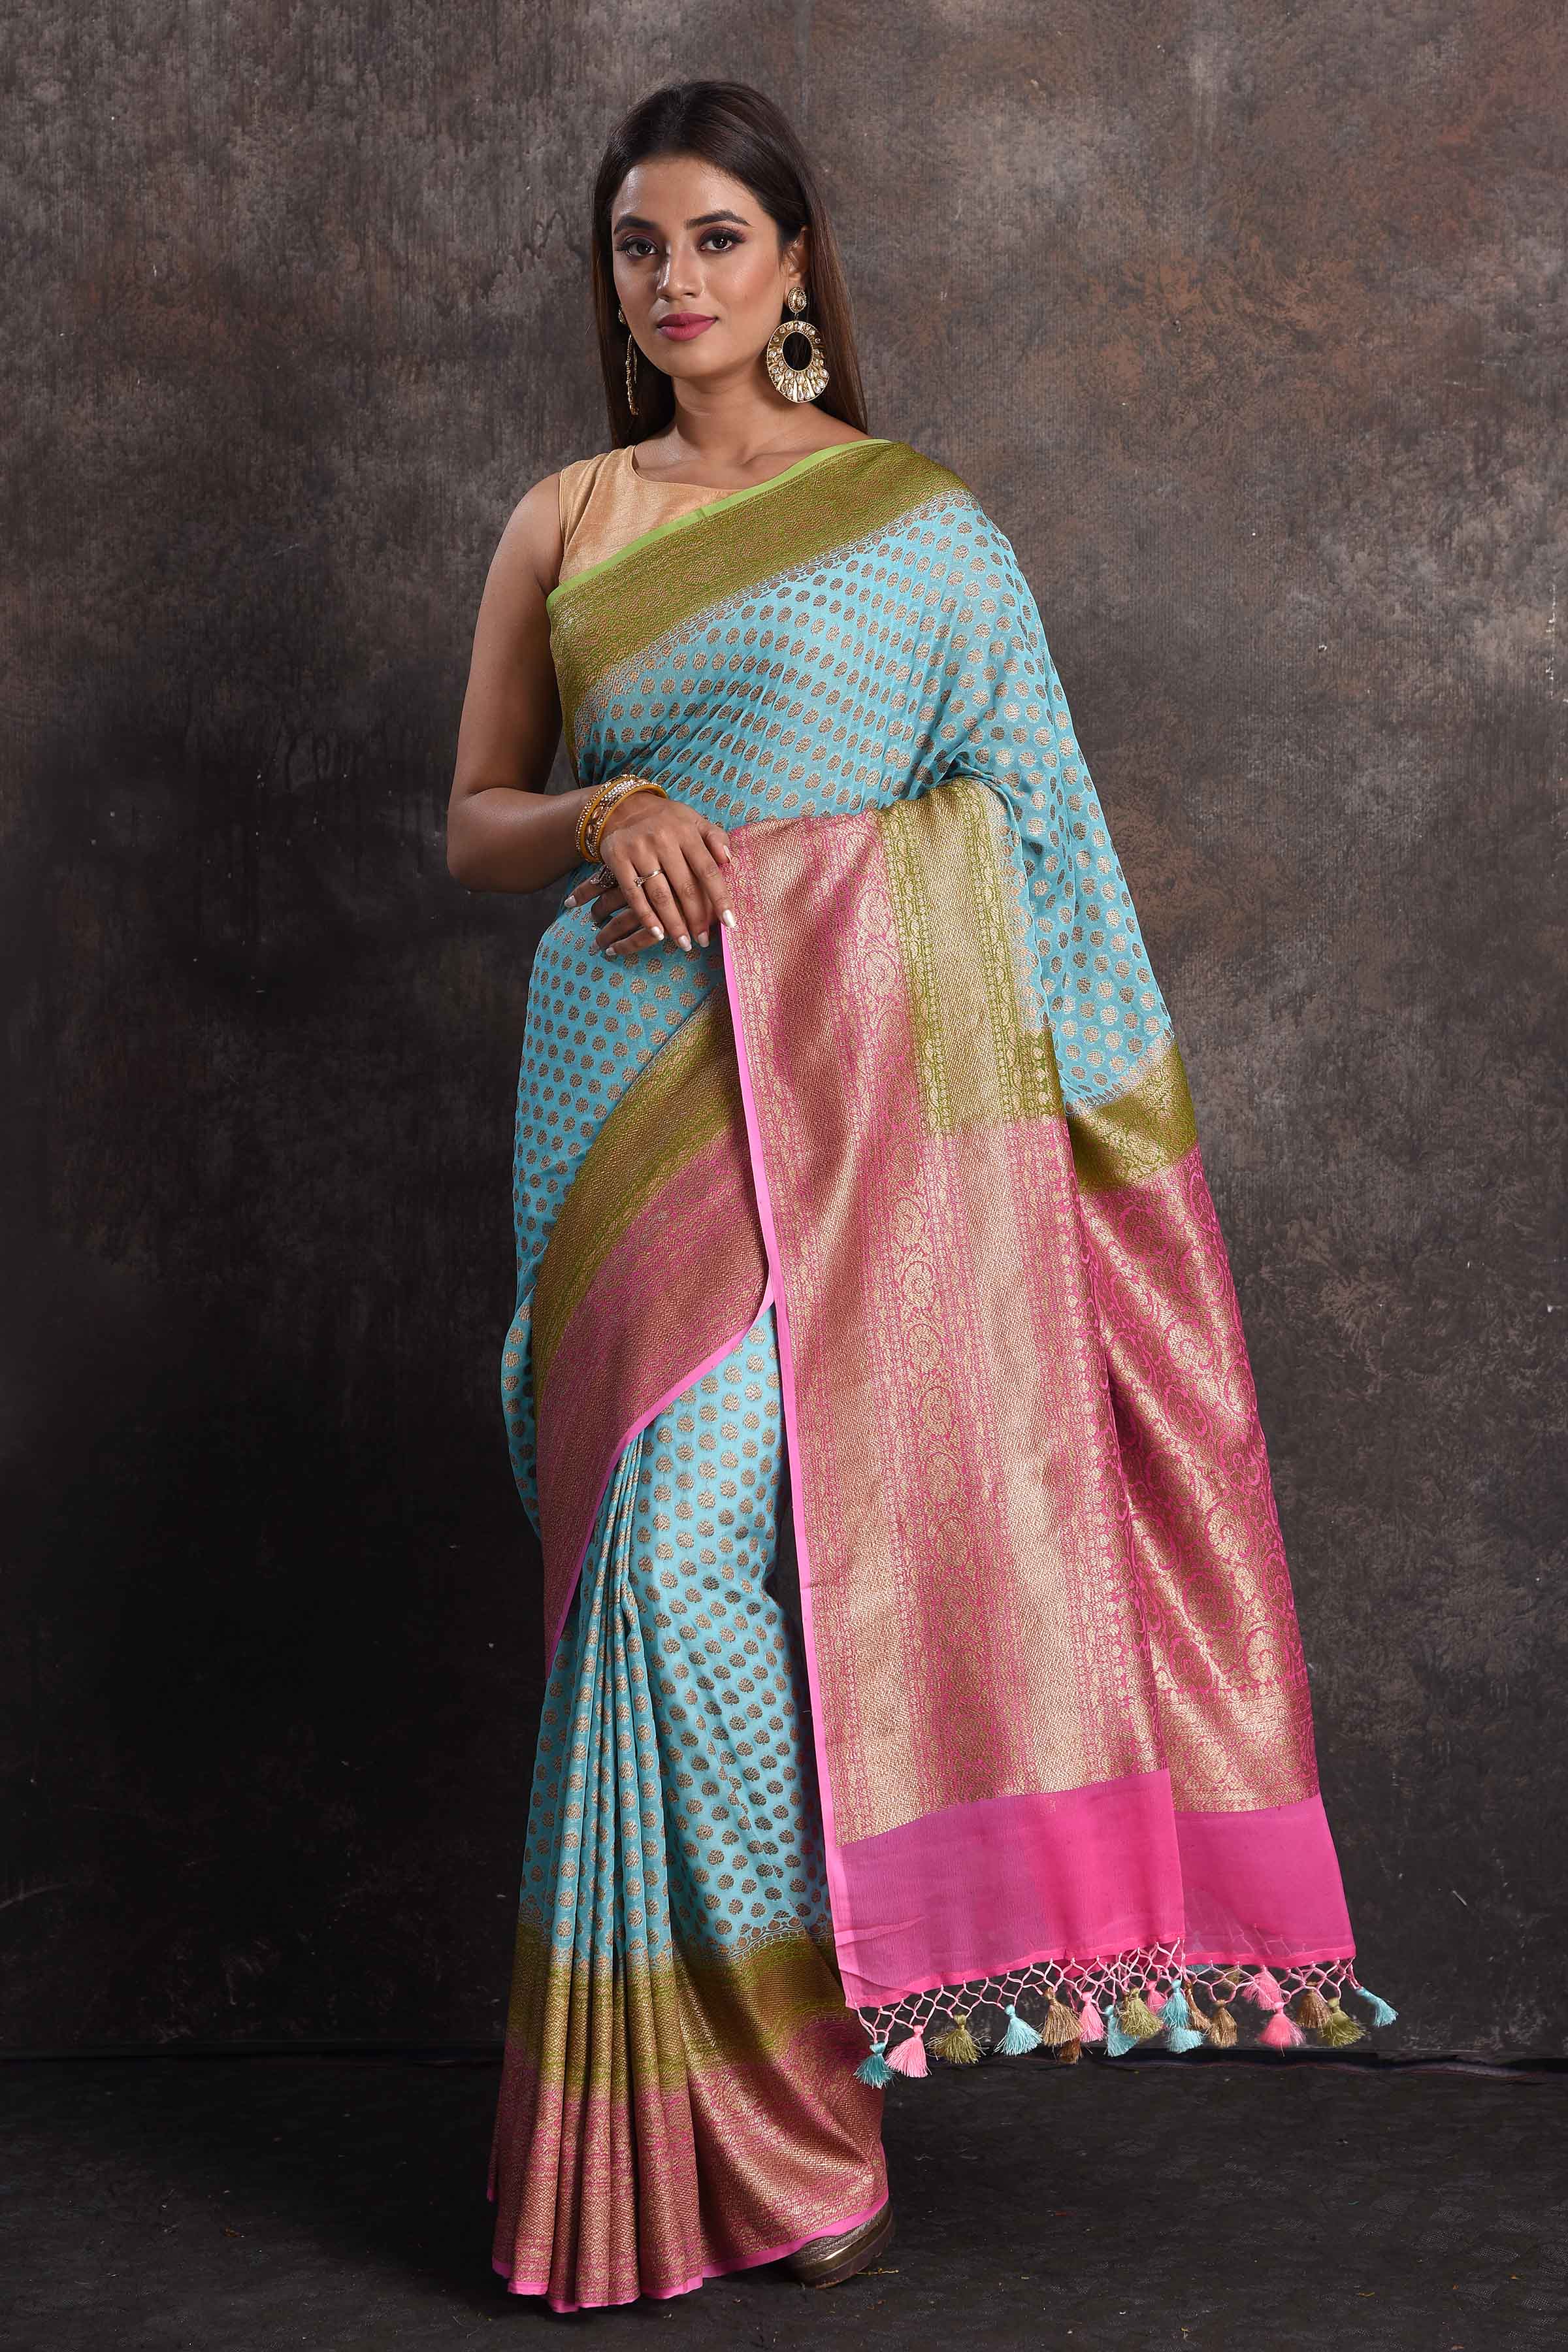 Buy beautiful sky blue georgette Banarasi saree online in USA with pink and green border, Be a vision of ethnic elegance on festive occasions in beautiful designer sarees, silk sarees, handloom sarees, Kanchipuram silk sarees, embroidered sarees from Pure Elegance Indian saree store in USA. -full view